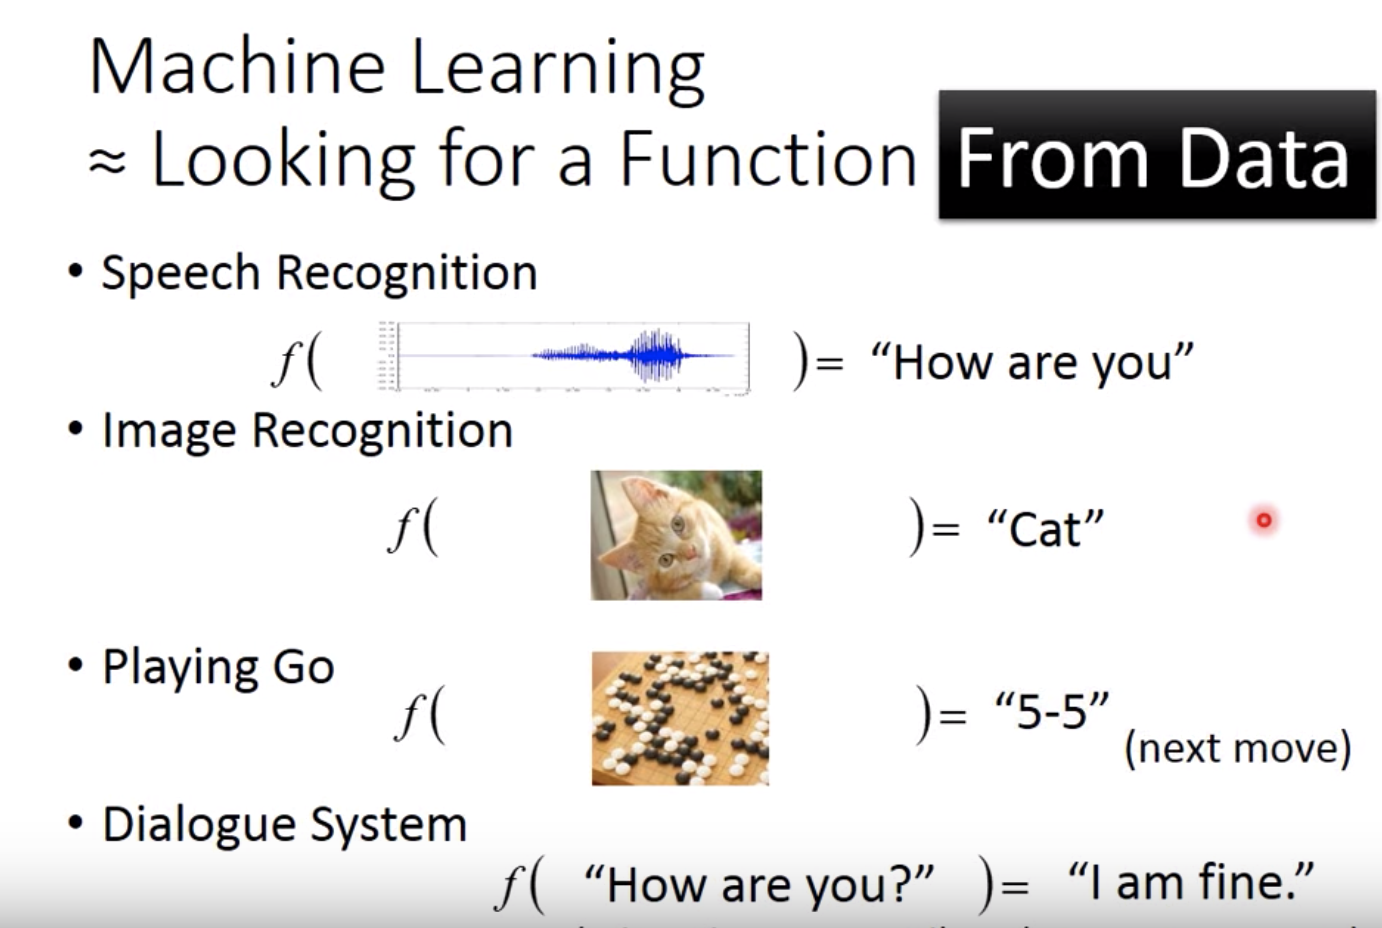 Machine learning what to do?